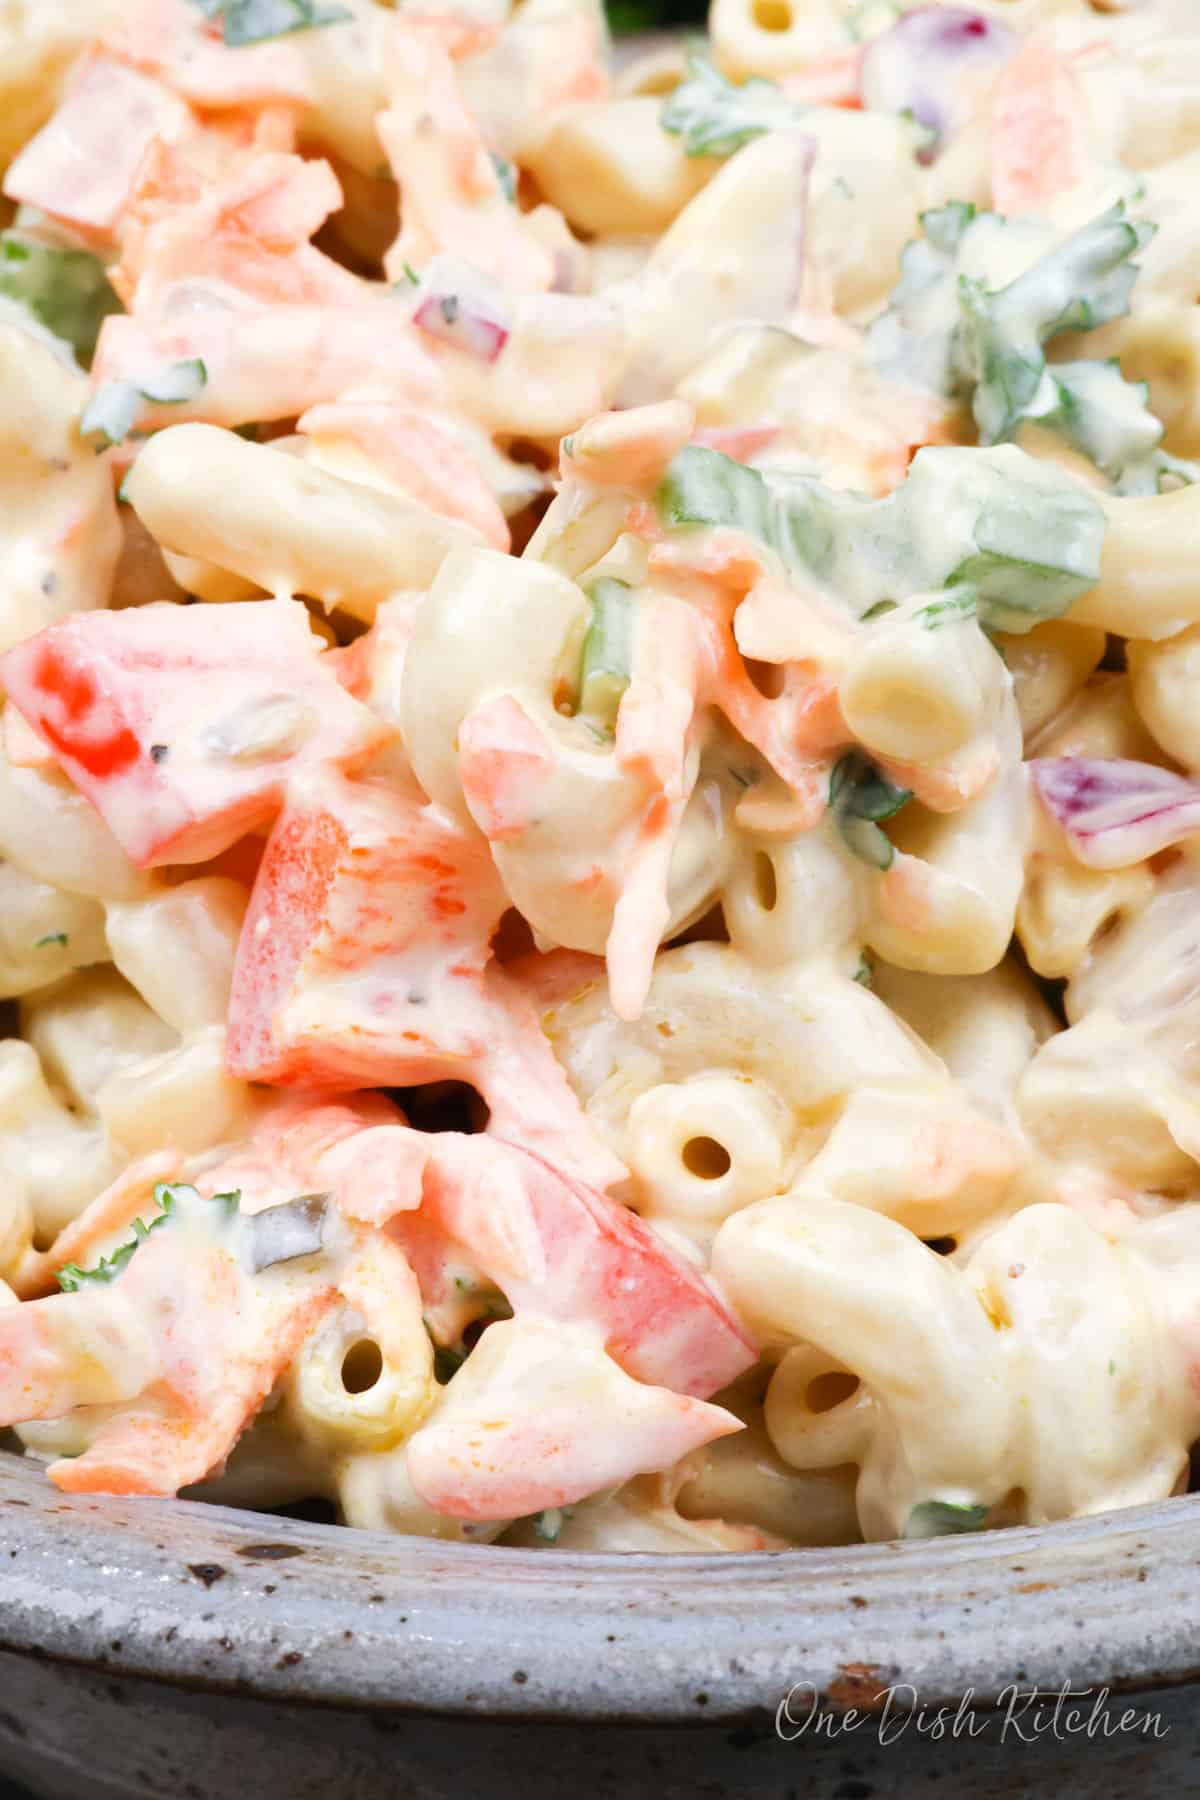 a close up photo of a macaroni salad with chopped vegetables and a creamy dressing.